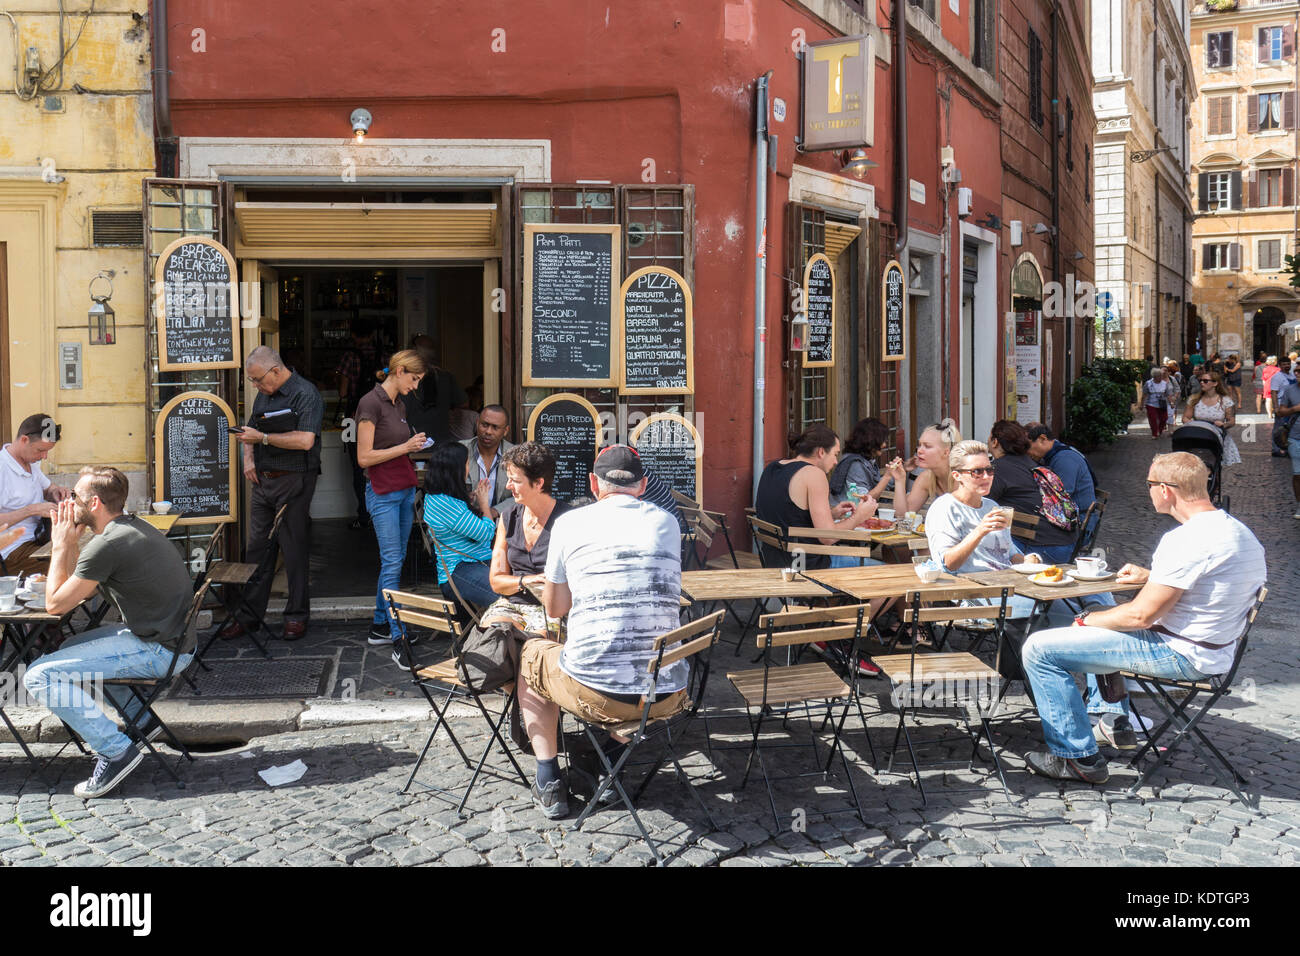 People sat at restaurant tables on a street in Rome, Italy Stock Photo